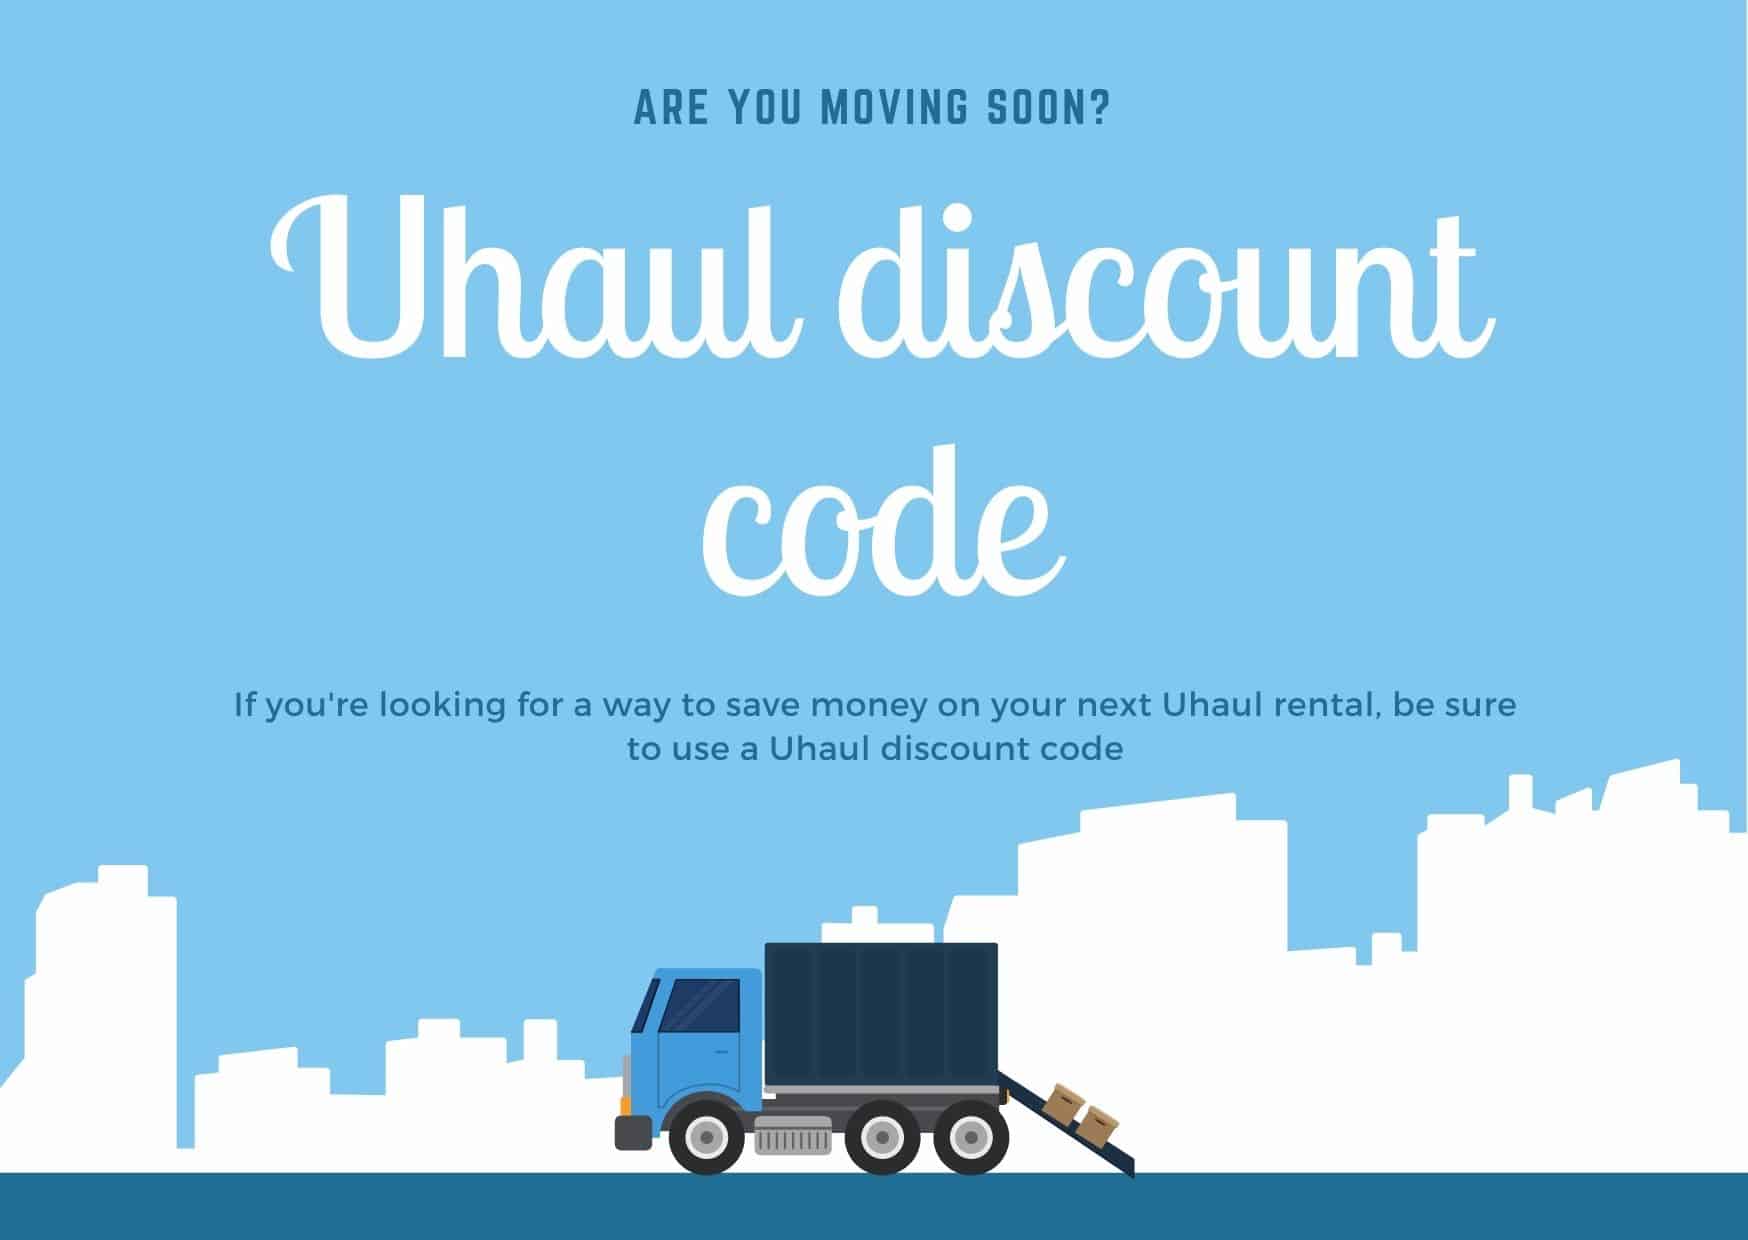 If you're looking for a way to save money on your next Uhaul rental, be sure to use a Uhaul discount code